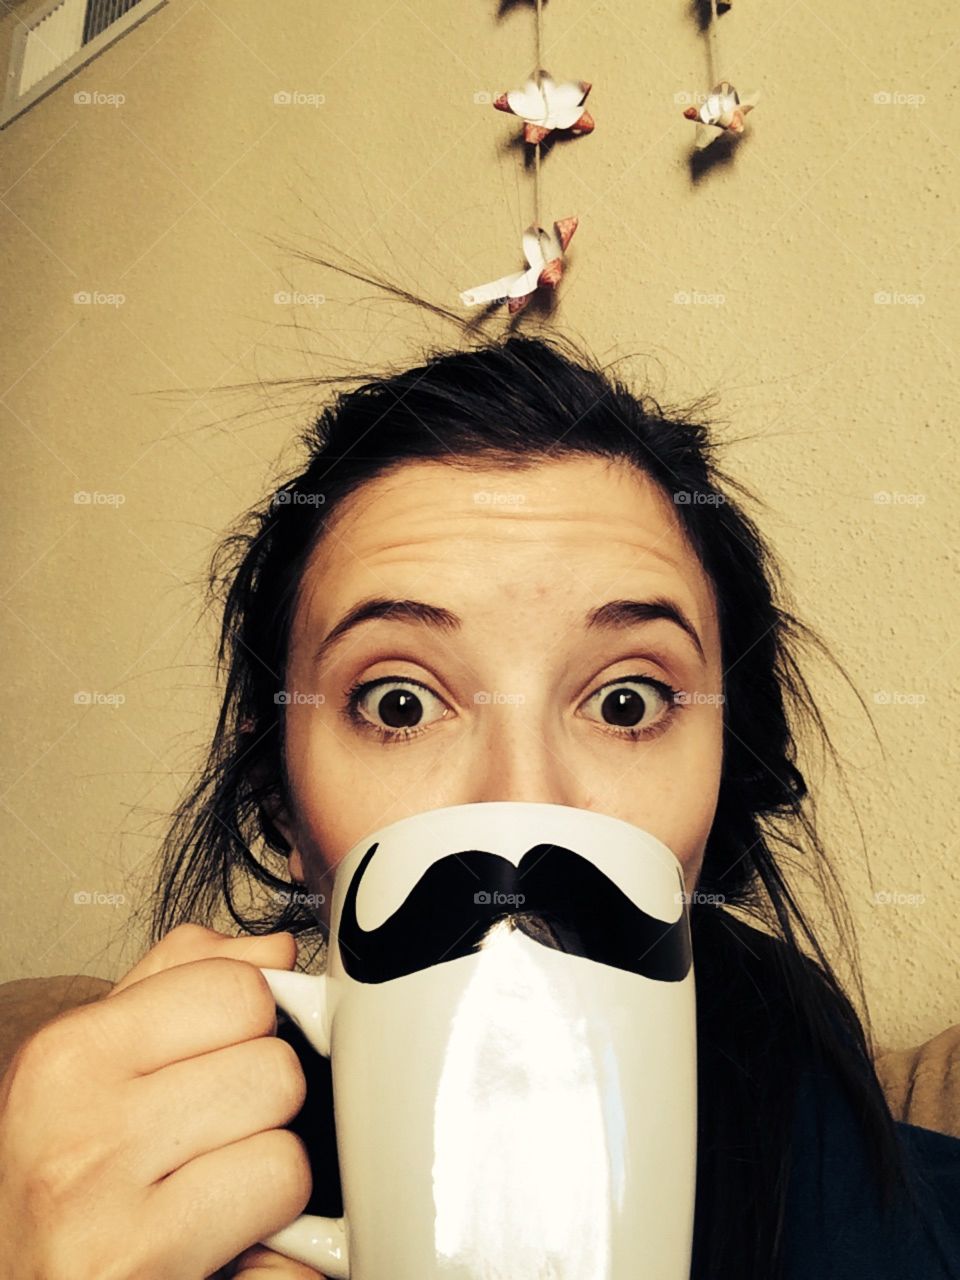 Mustache mug. Drinking coffee with a mustache. 